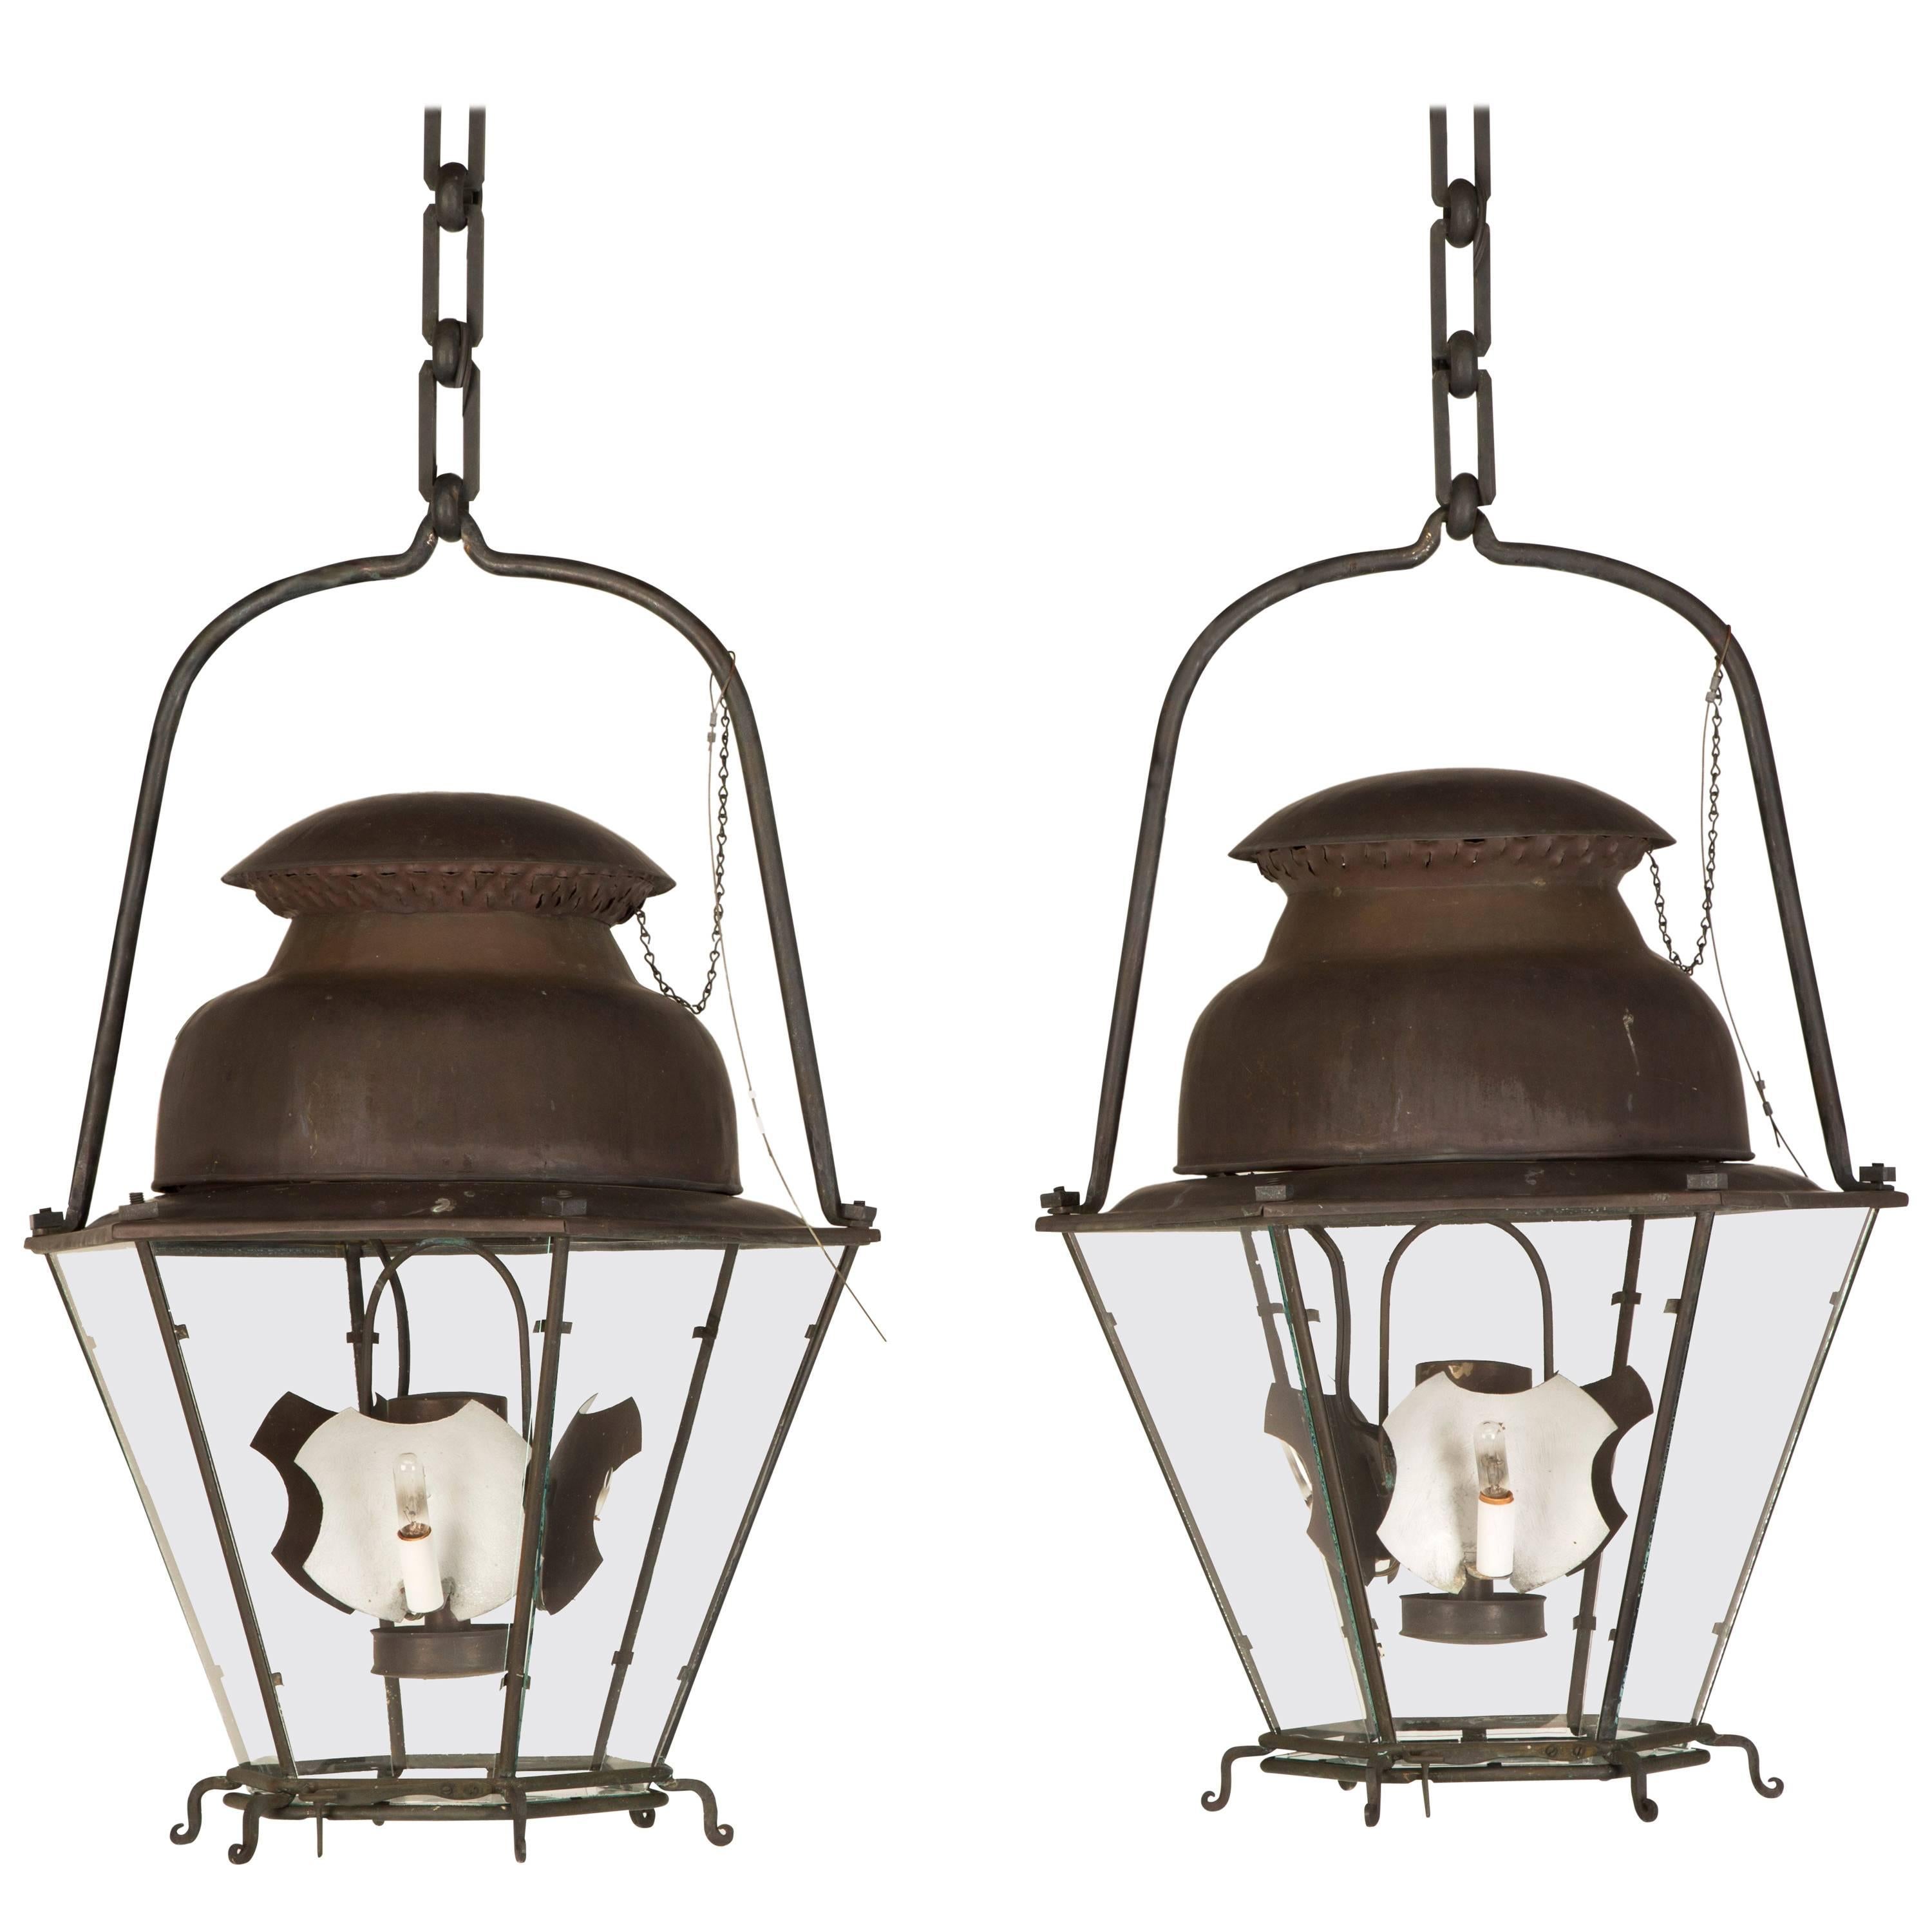 French 18th Century Style Copper Lanterns from the Original French Blueprints